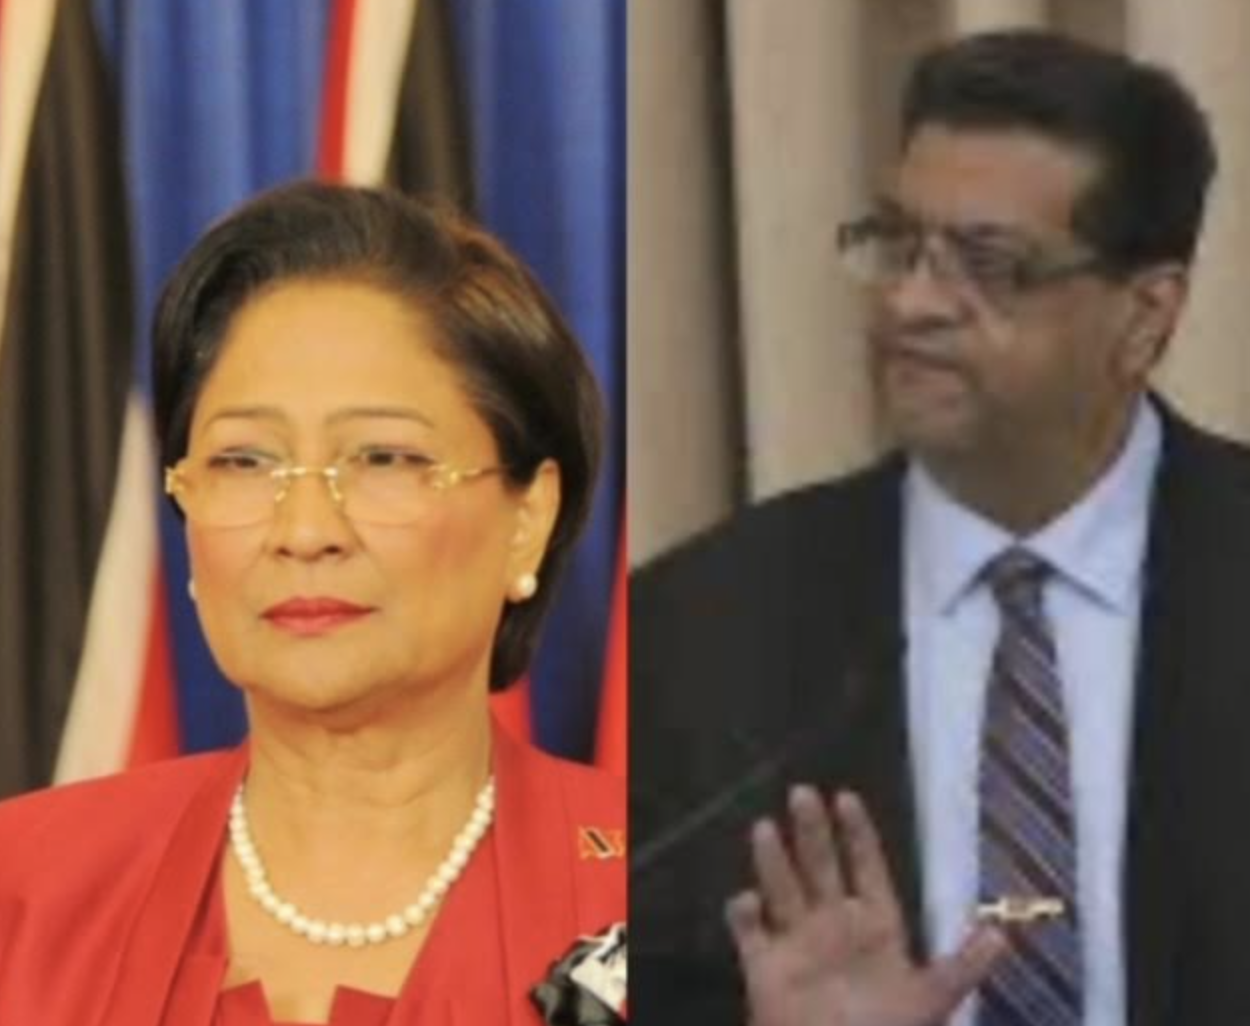 Rushton Paray’s call for Persad-Bissessar to call internal elections in June seen as political suicide as 12 MP’s publicly  support Persad Bissessar